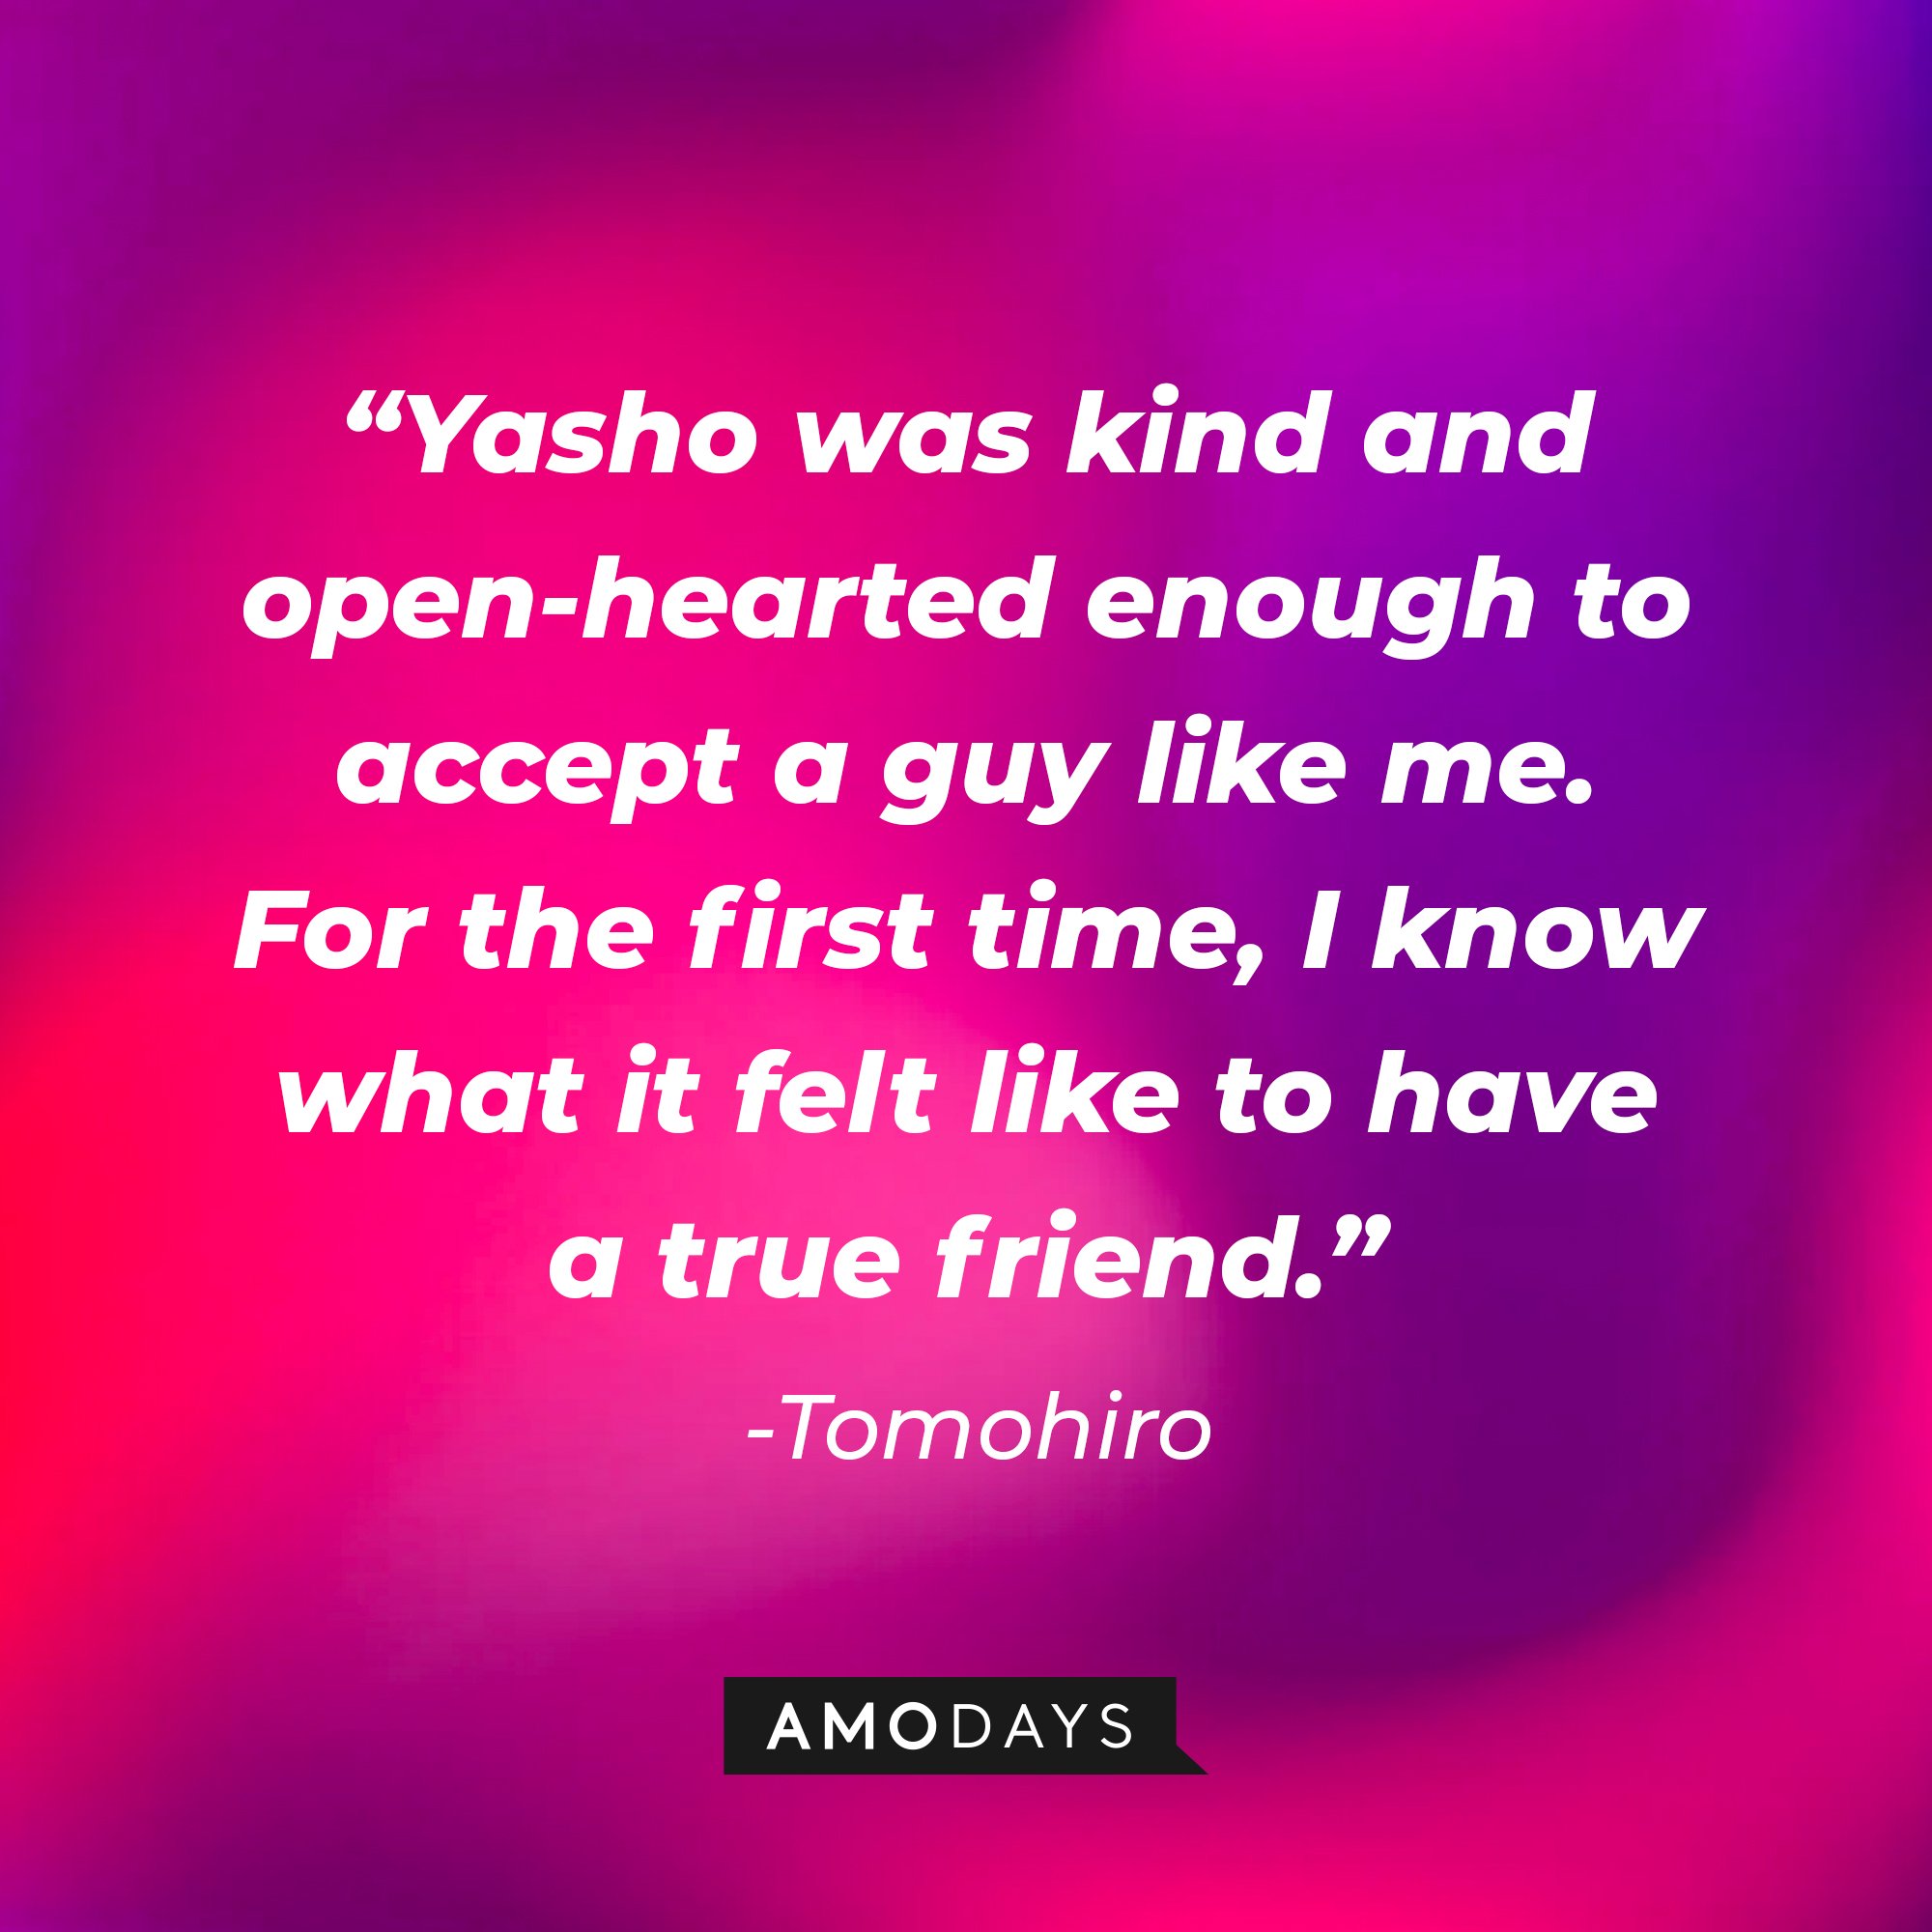 Tomohiro’s quote: "Yasho was kind and open-hearted enough to accept a guy like me. For the first time, I know what it felt like to have a true friend." | Image: AmoDays